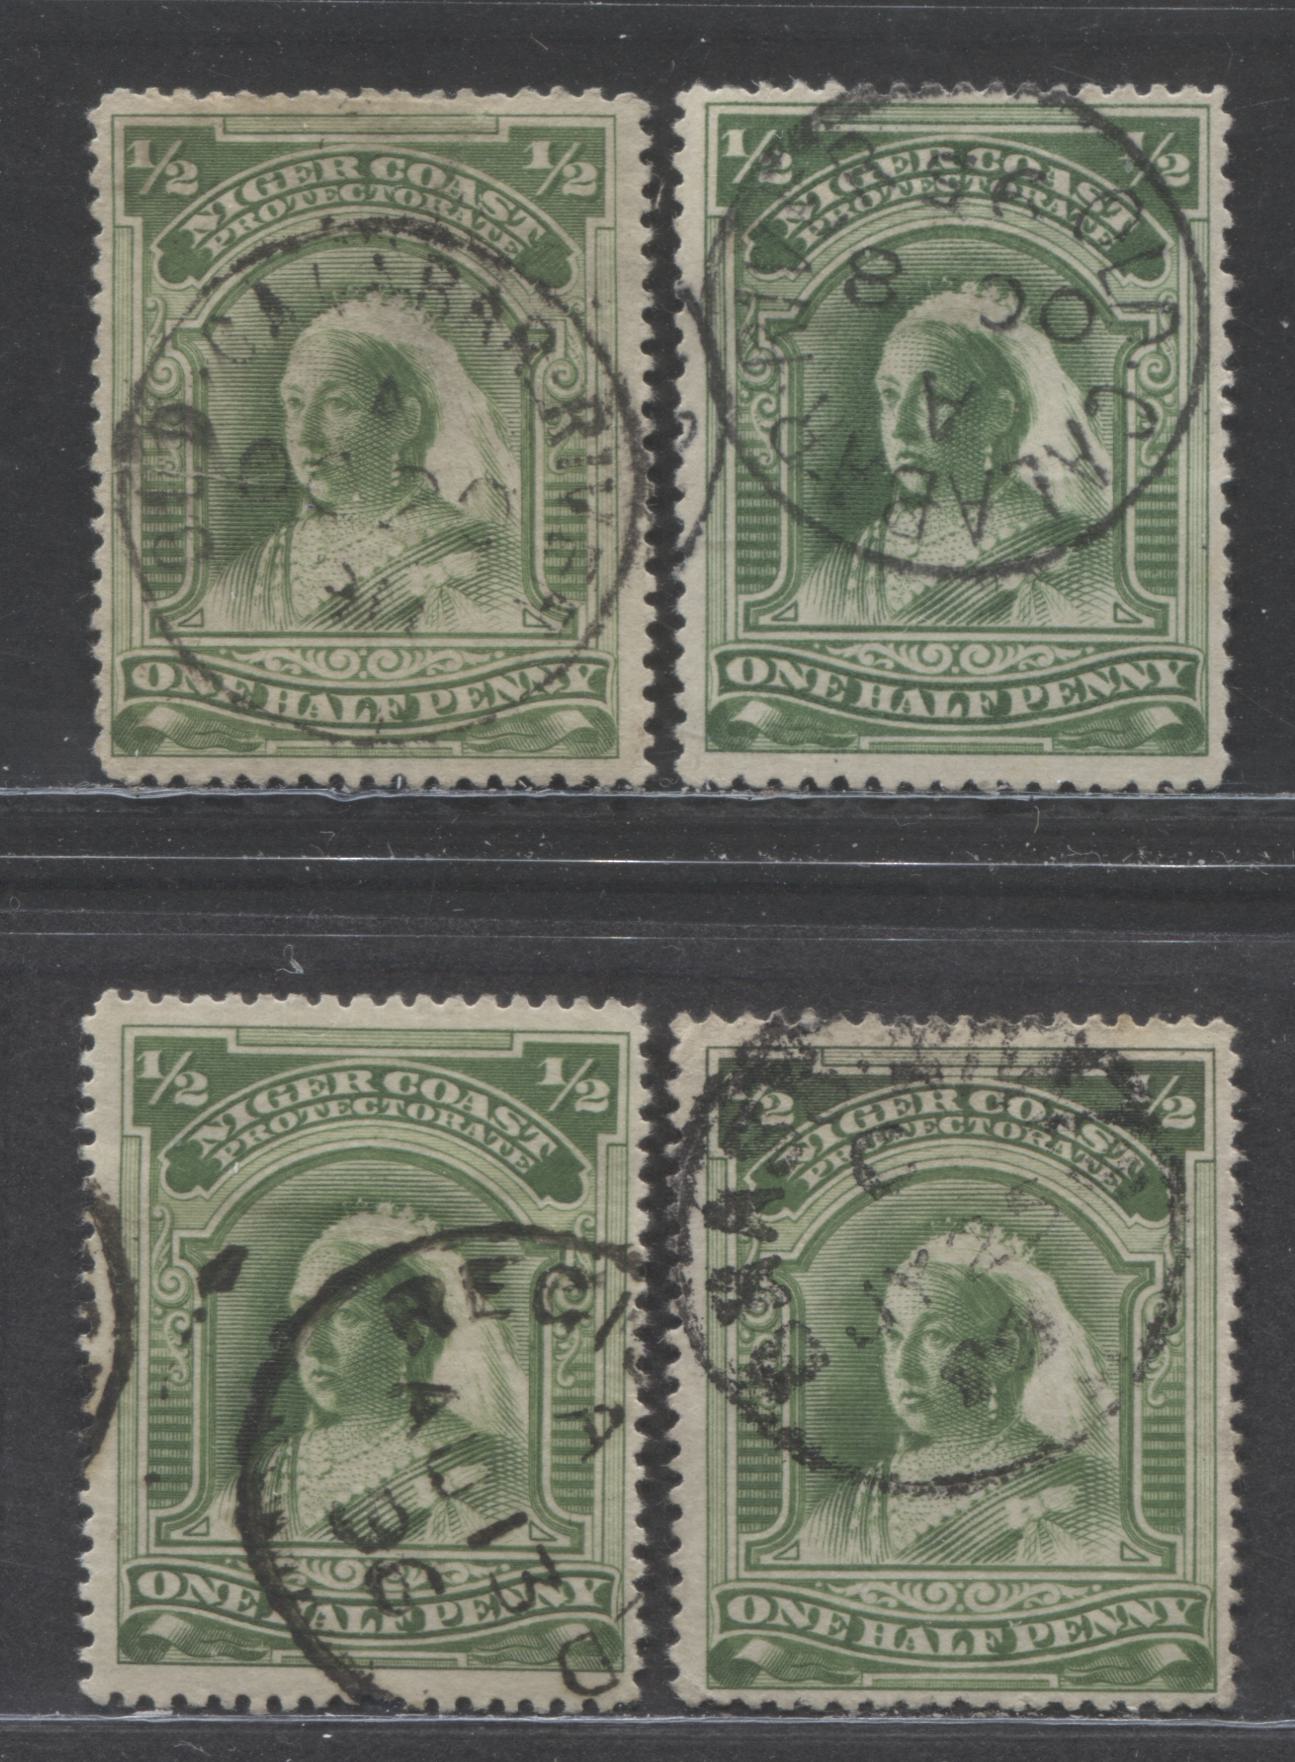 Lot 178 Niger Coast SC#43 (SG#51) One Halfpenny Green, Yellow Green 1894 Unwatermarked Issue, Perf 14.5 - 15, A Very Good - Fine Used Example, Click on Listing to See ALL Pictures, 2022 Scott Classic Cat. $16.5 USD